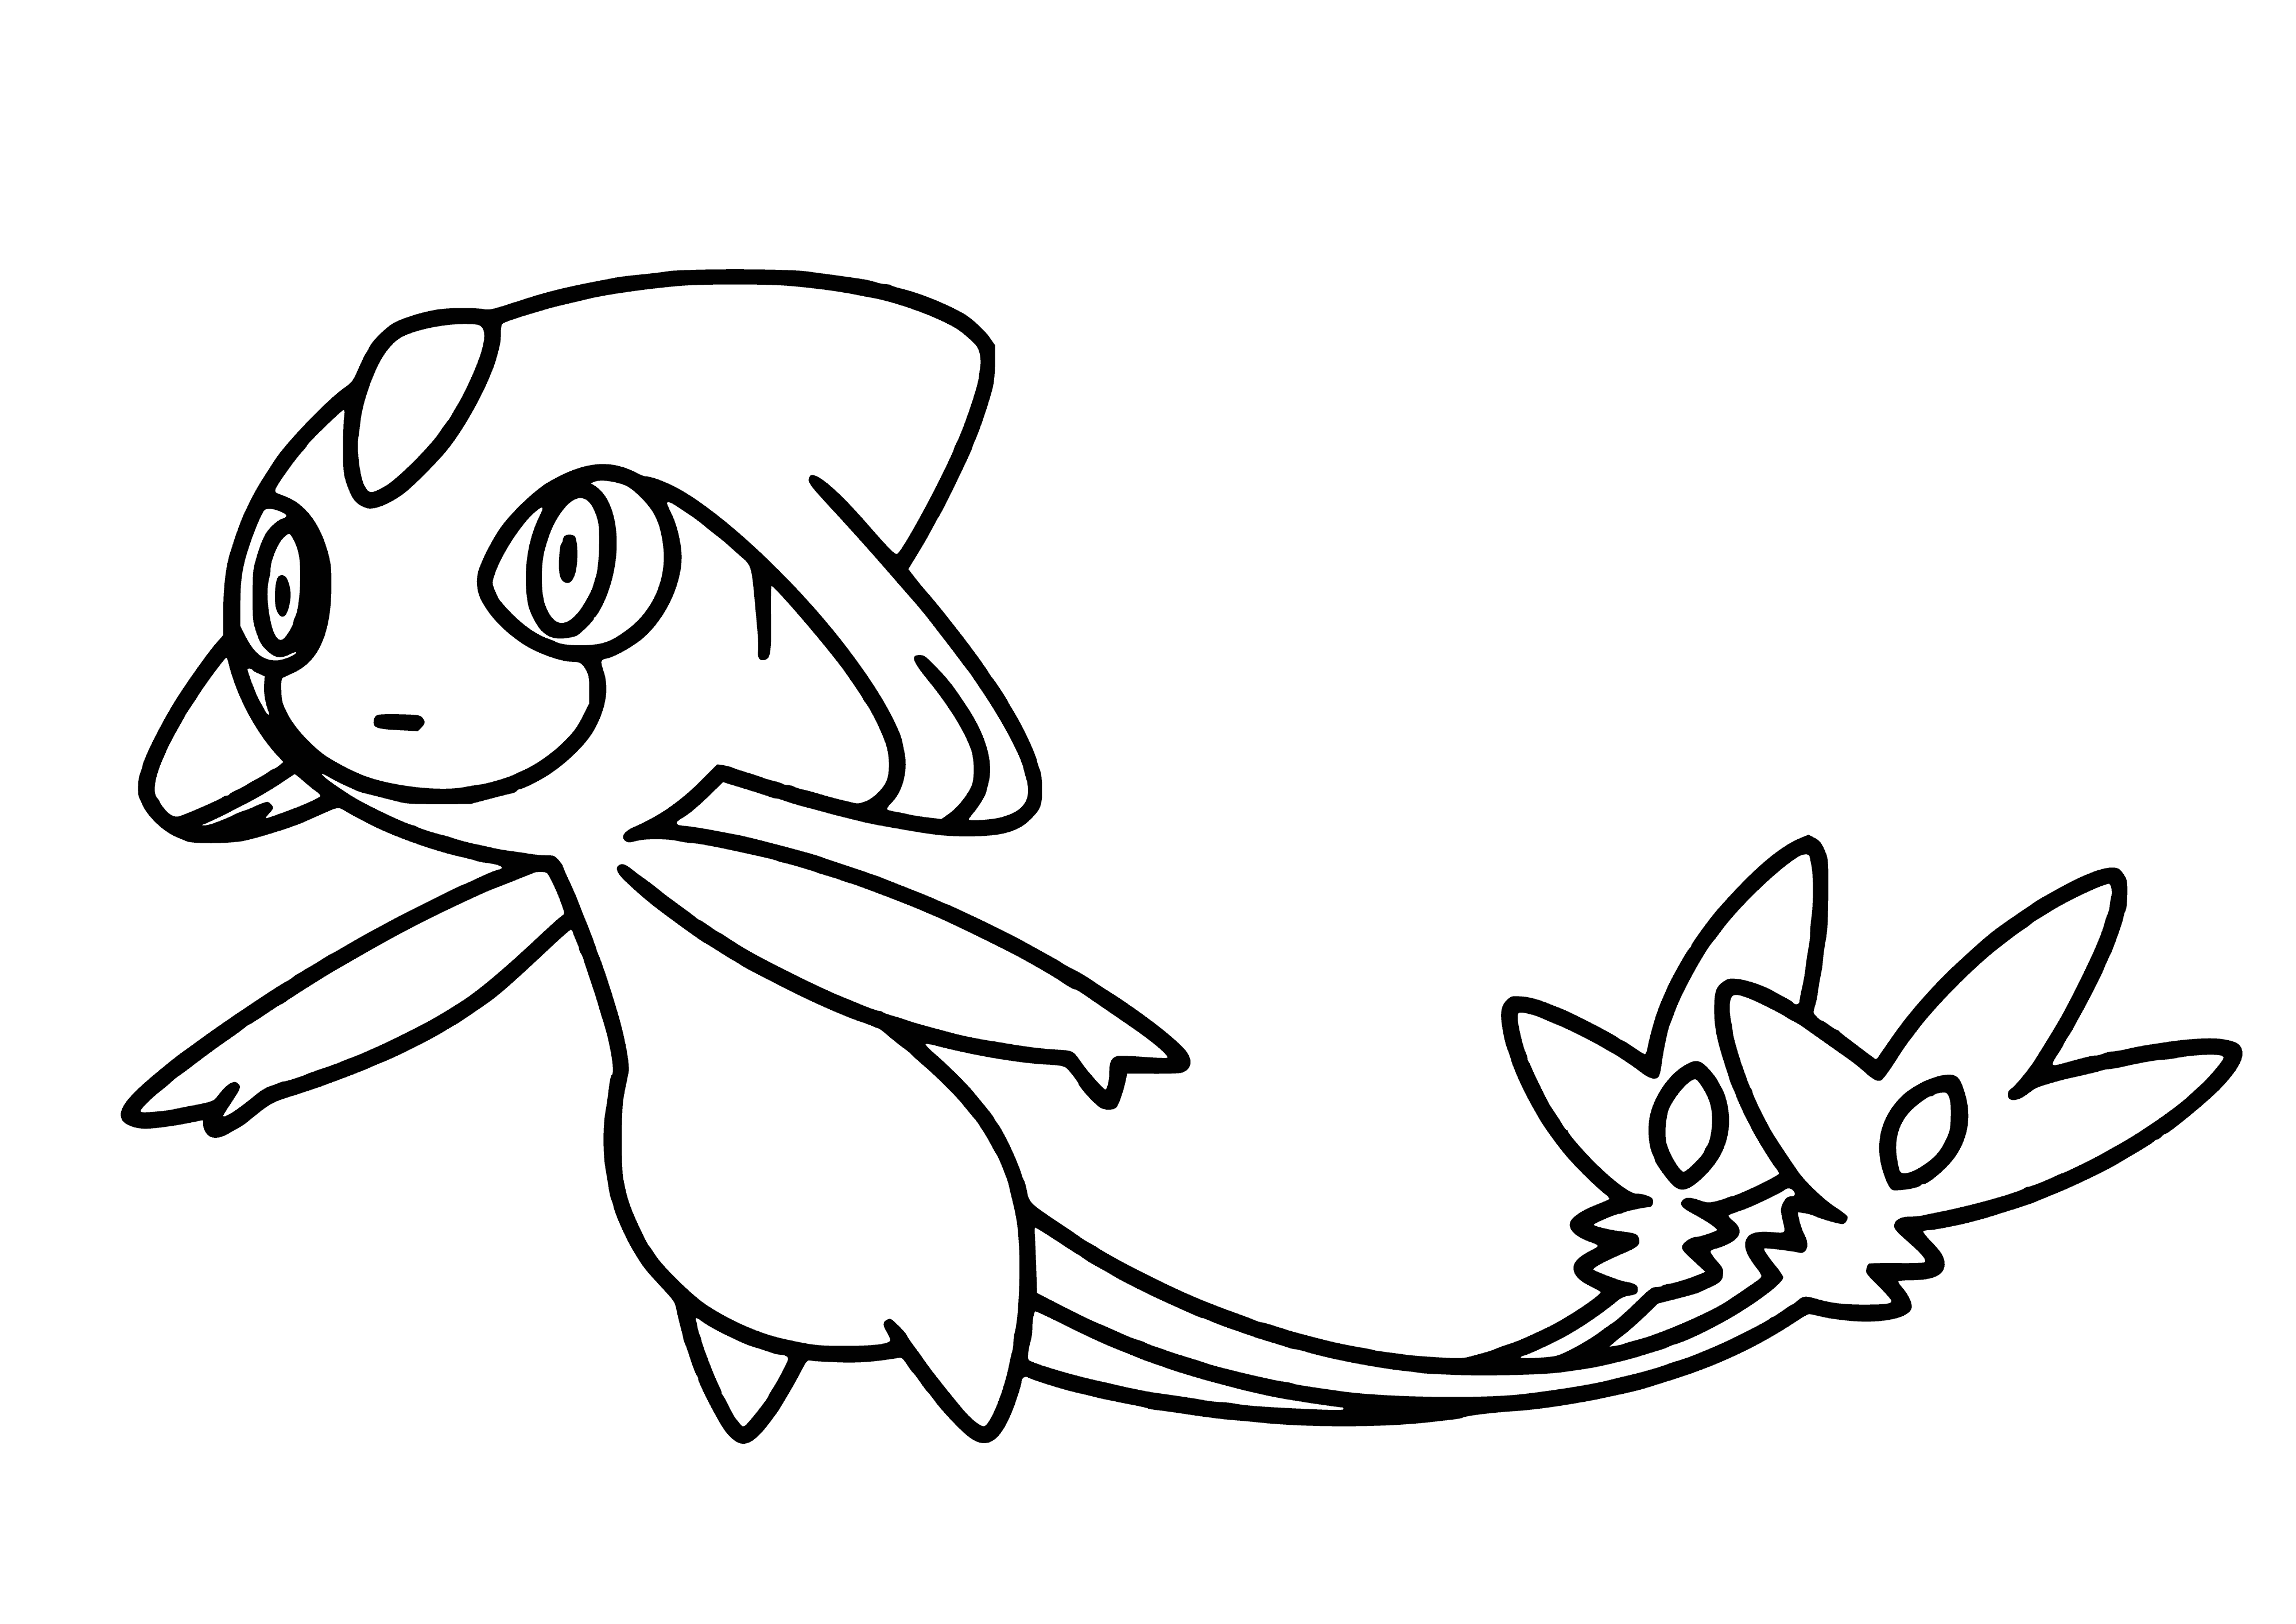 coloring page: Small blue fairy-like Pokémon with pointed ears, yellow forehead and white diamond chin marks, yellow star belly, red tail.